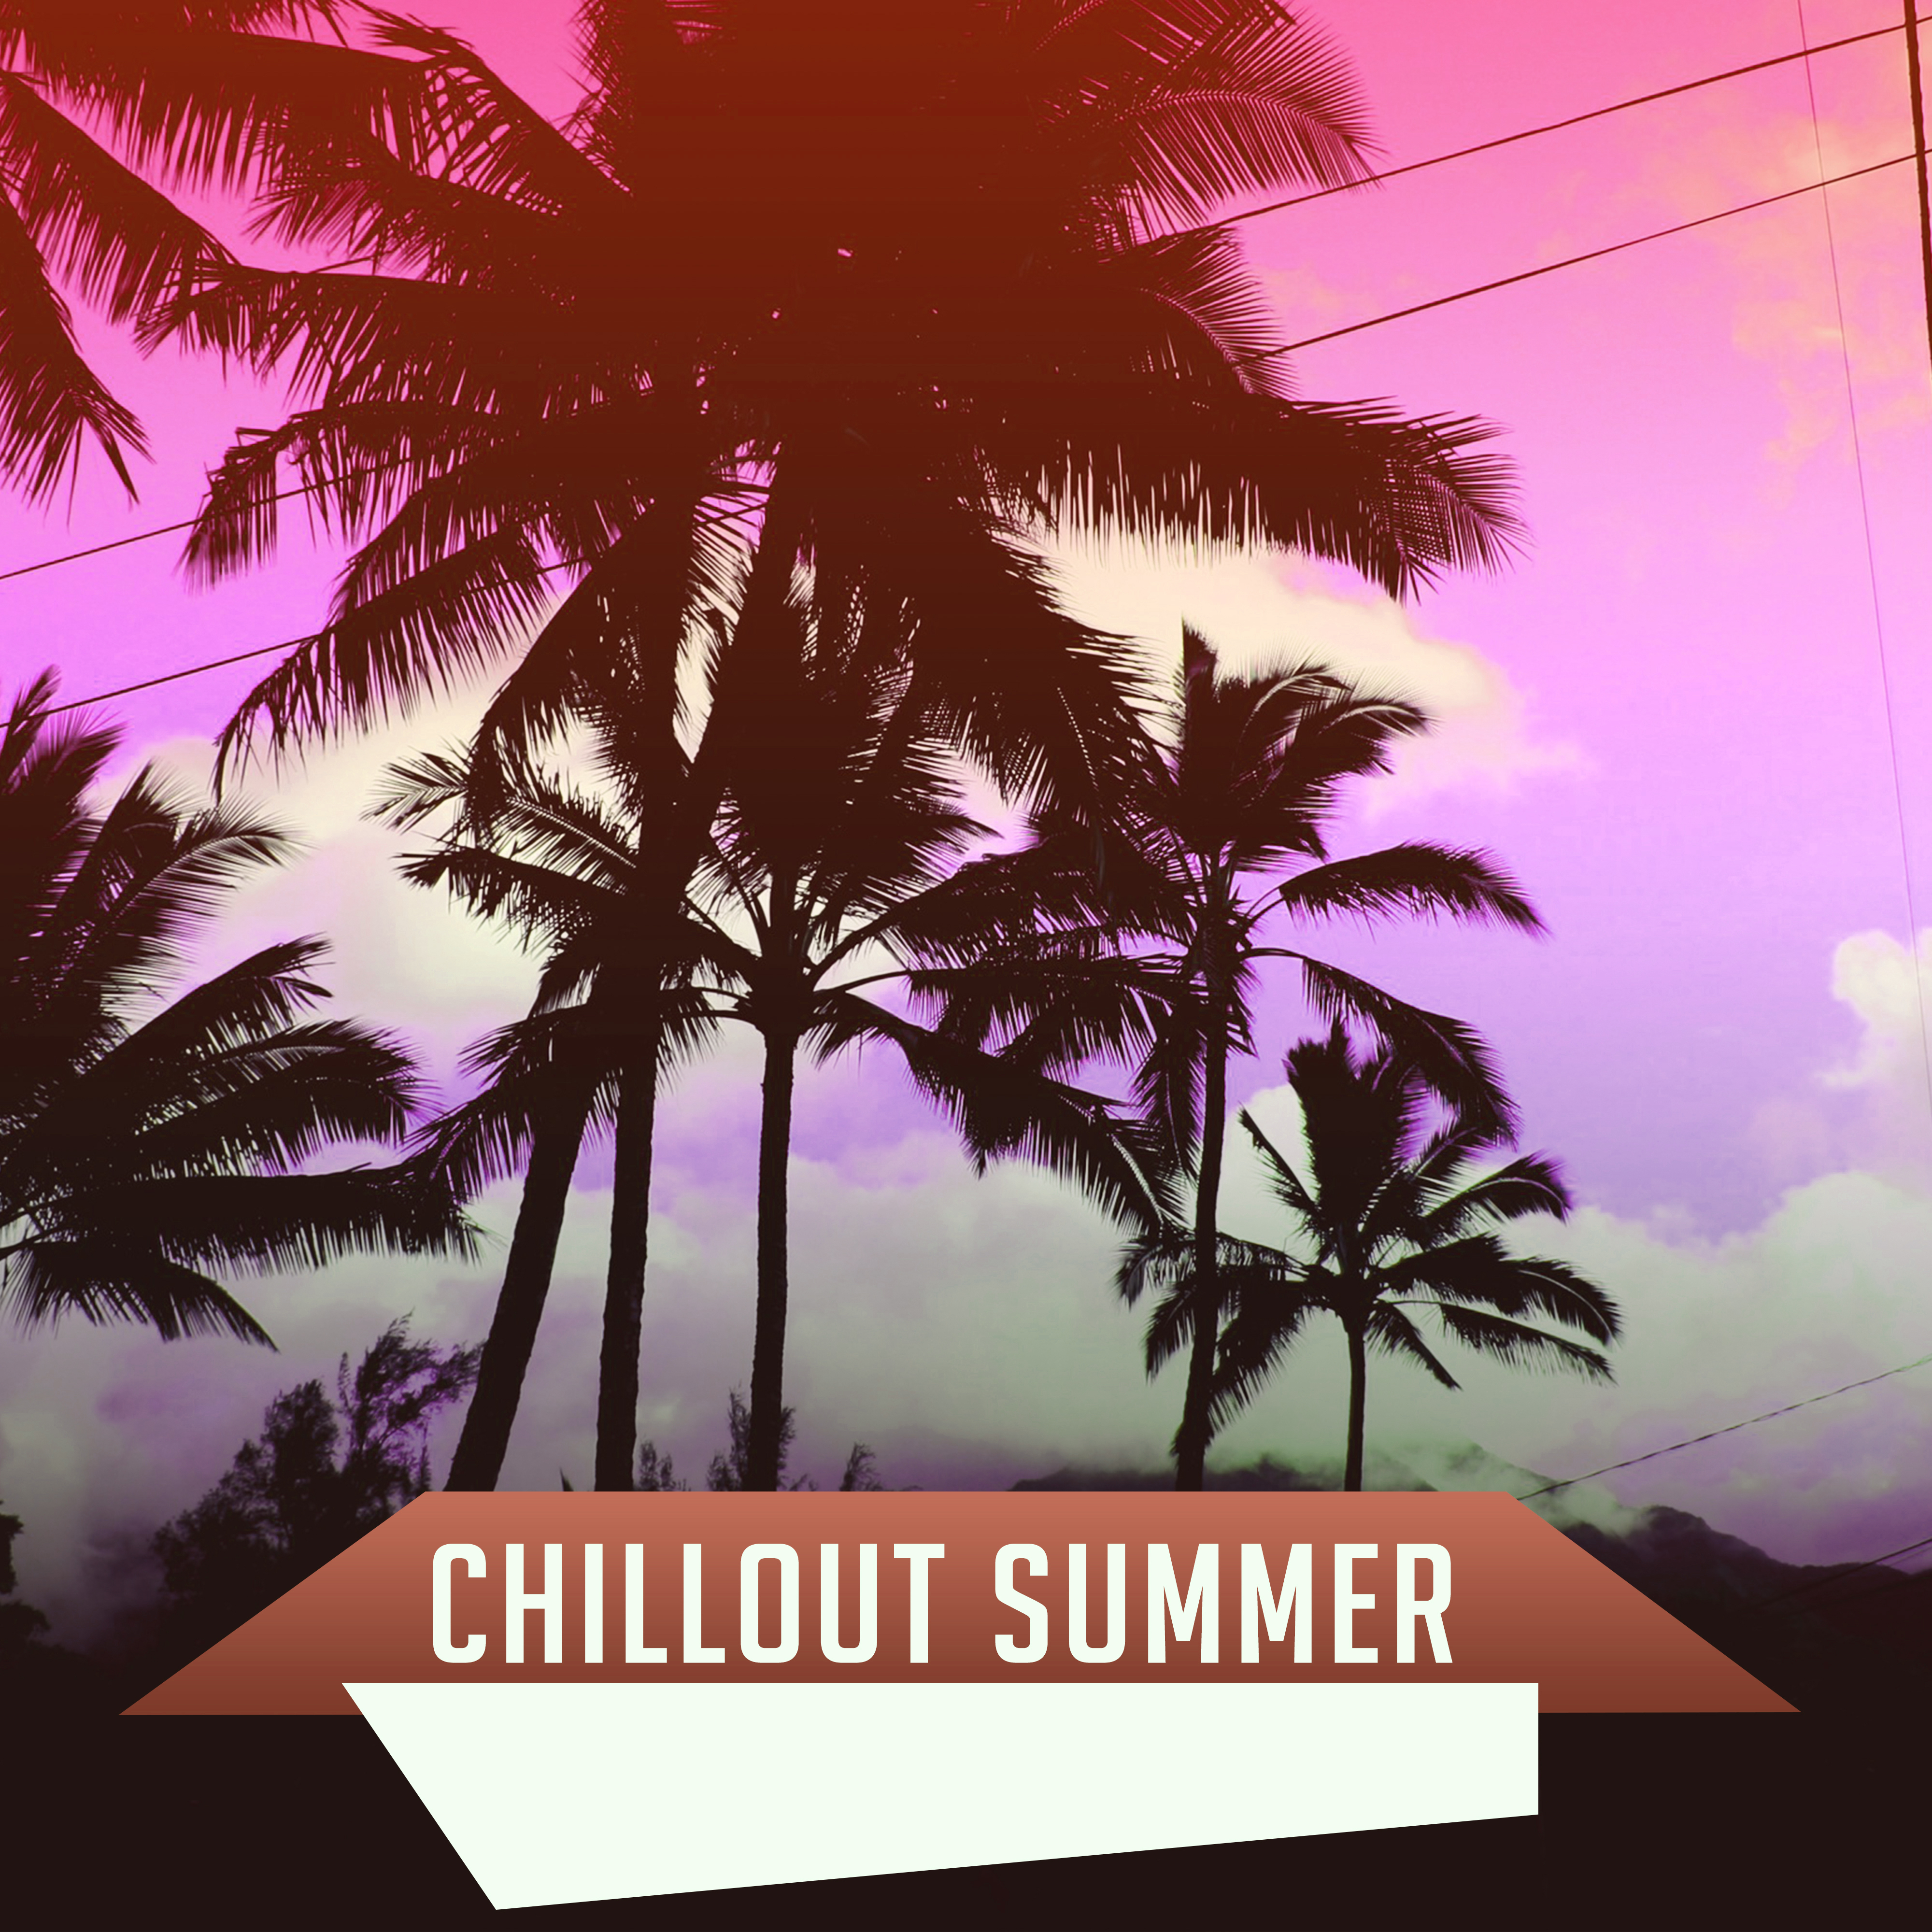 Chillout Summer – Music 4 Ever, Beach Party, Relax, Ibiza Lounge, Afterhours Chill